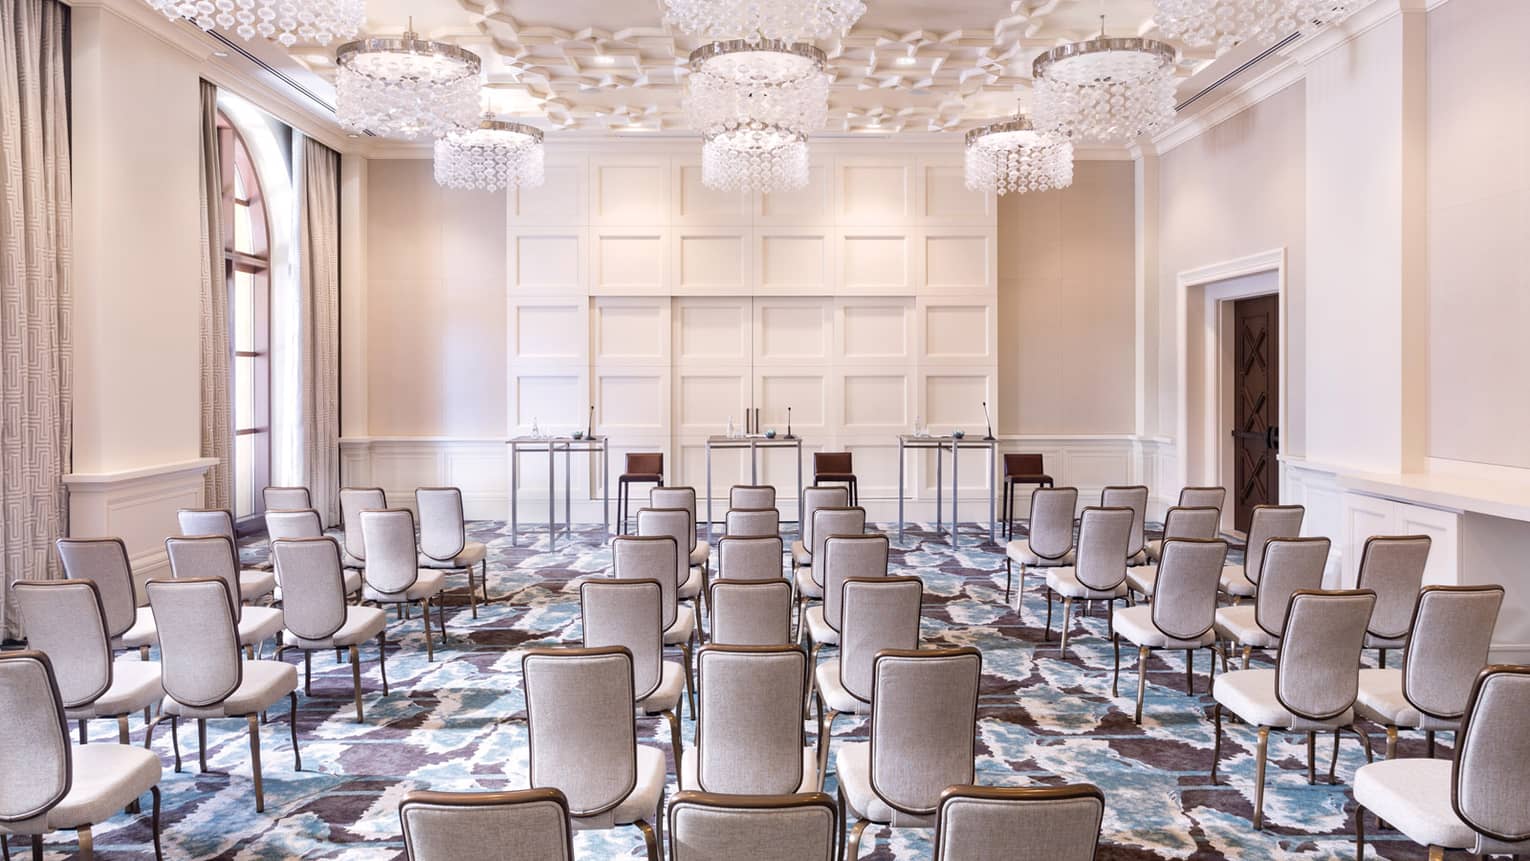 A cream colored function room is set up with rows of neutral chairs lined up and facing three tables in the front